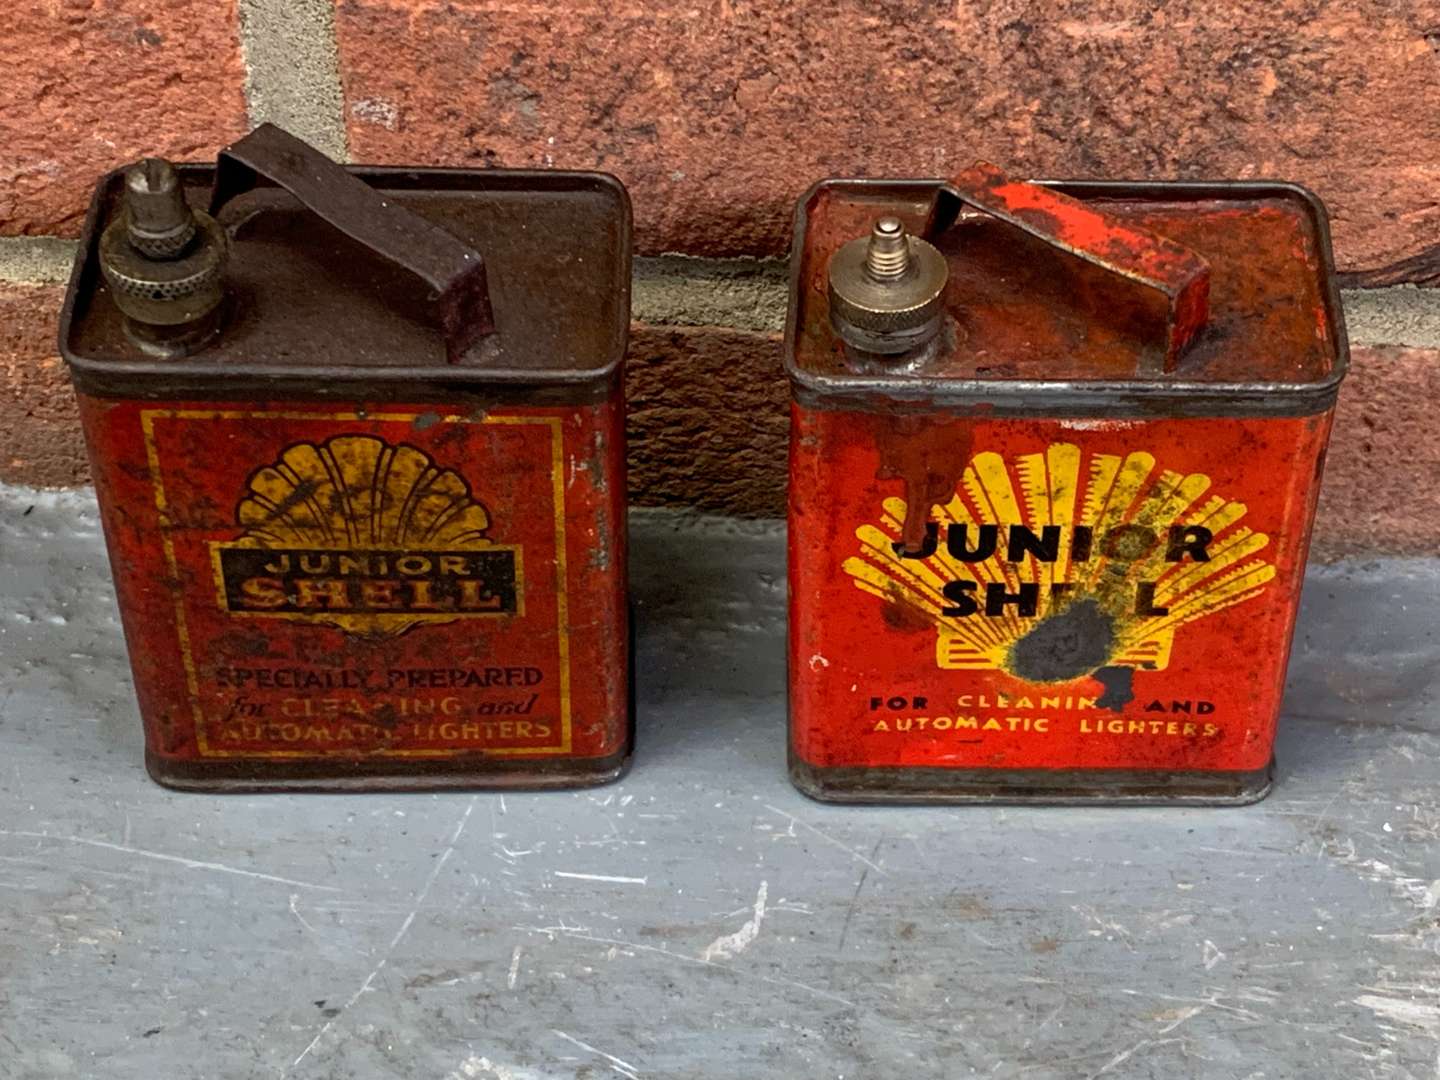 <p>Two Early Junior Shell Oil Cans</p>